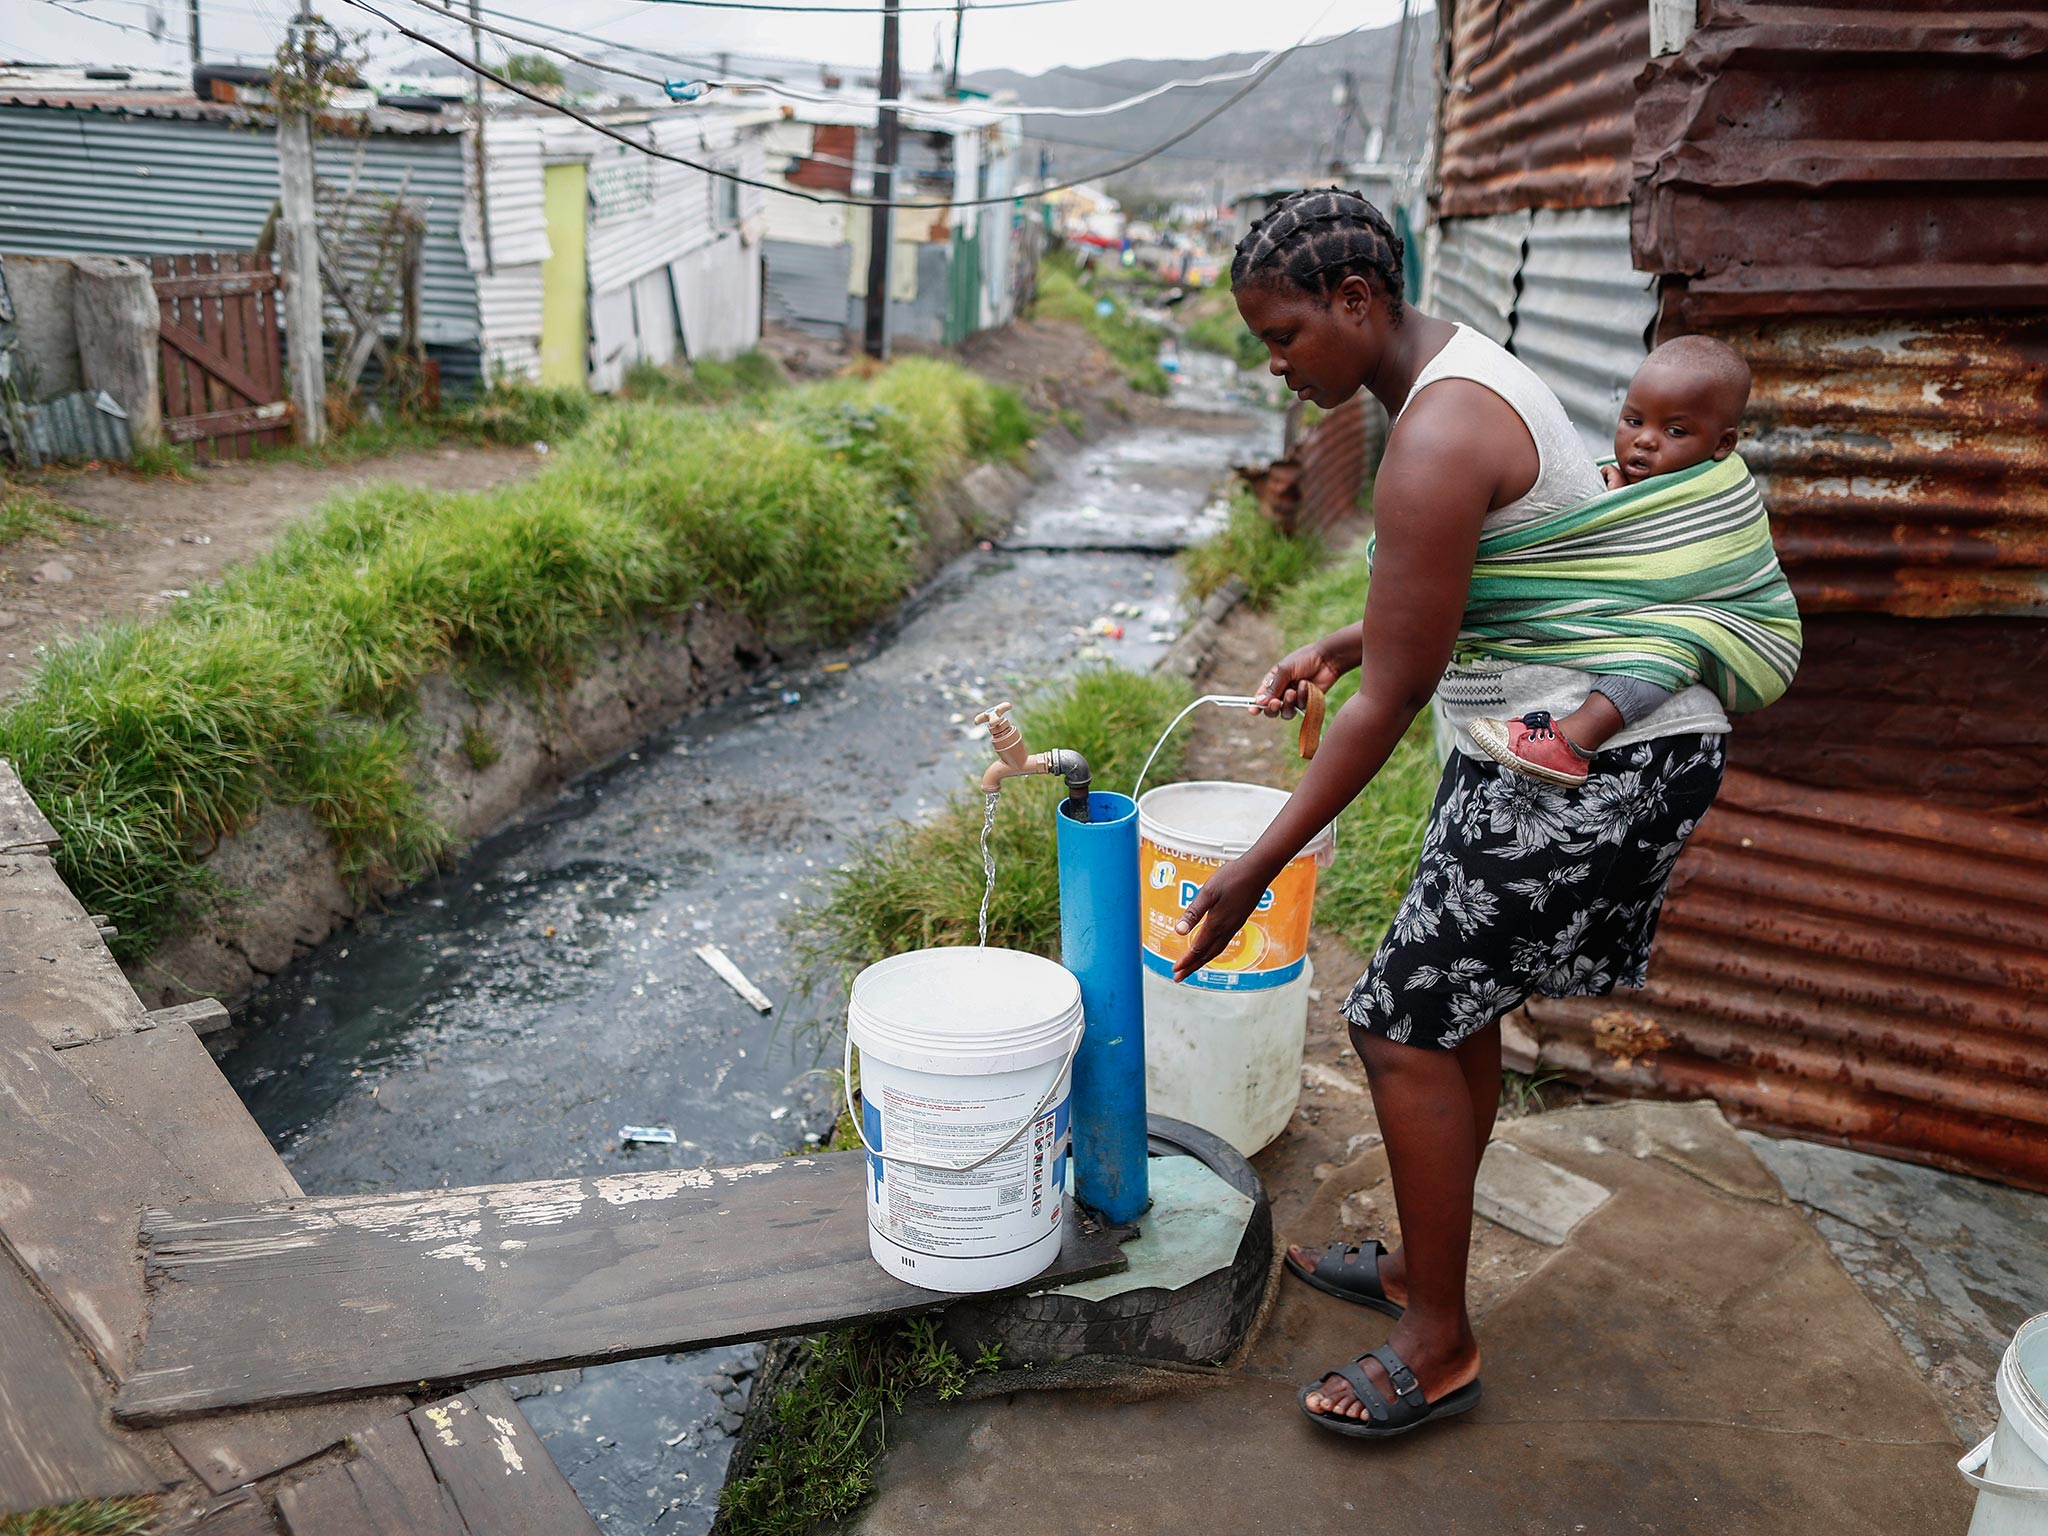 A resident collects drinking water from a communal municipal tap in Cape Town, South Africa